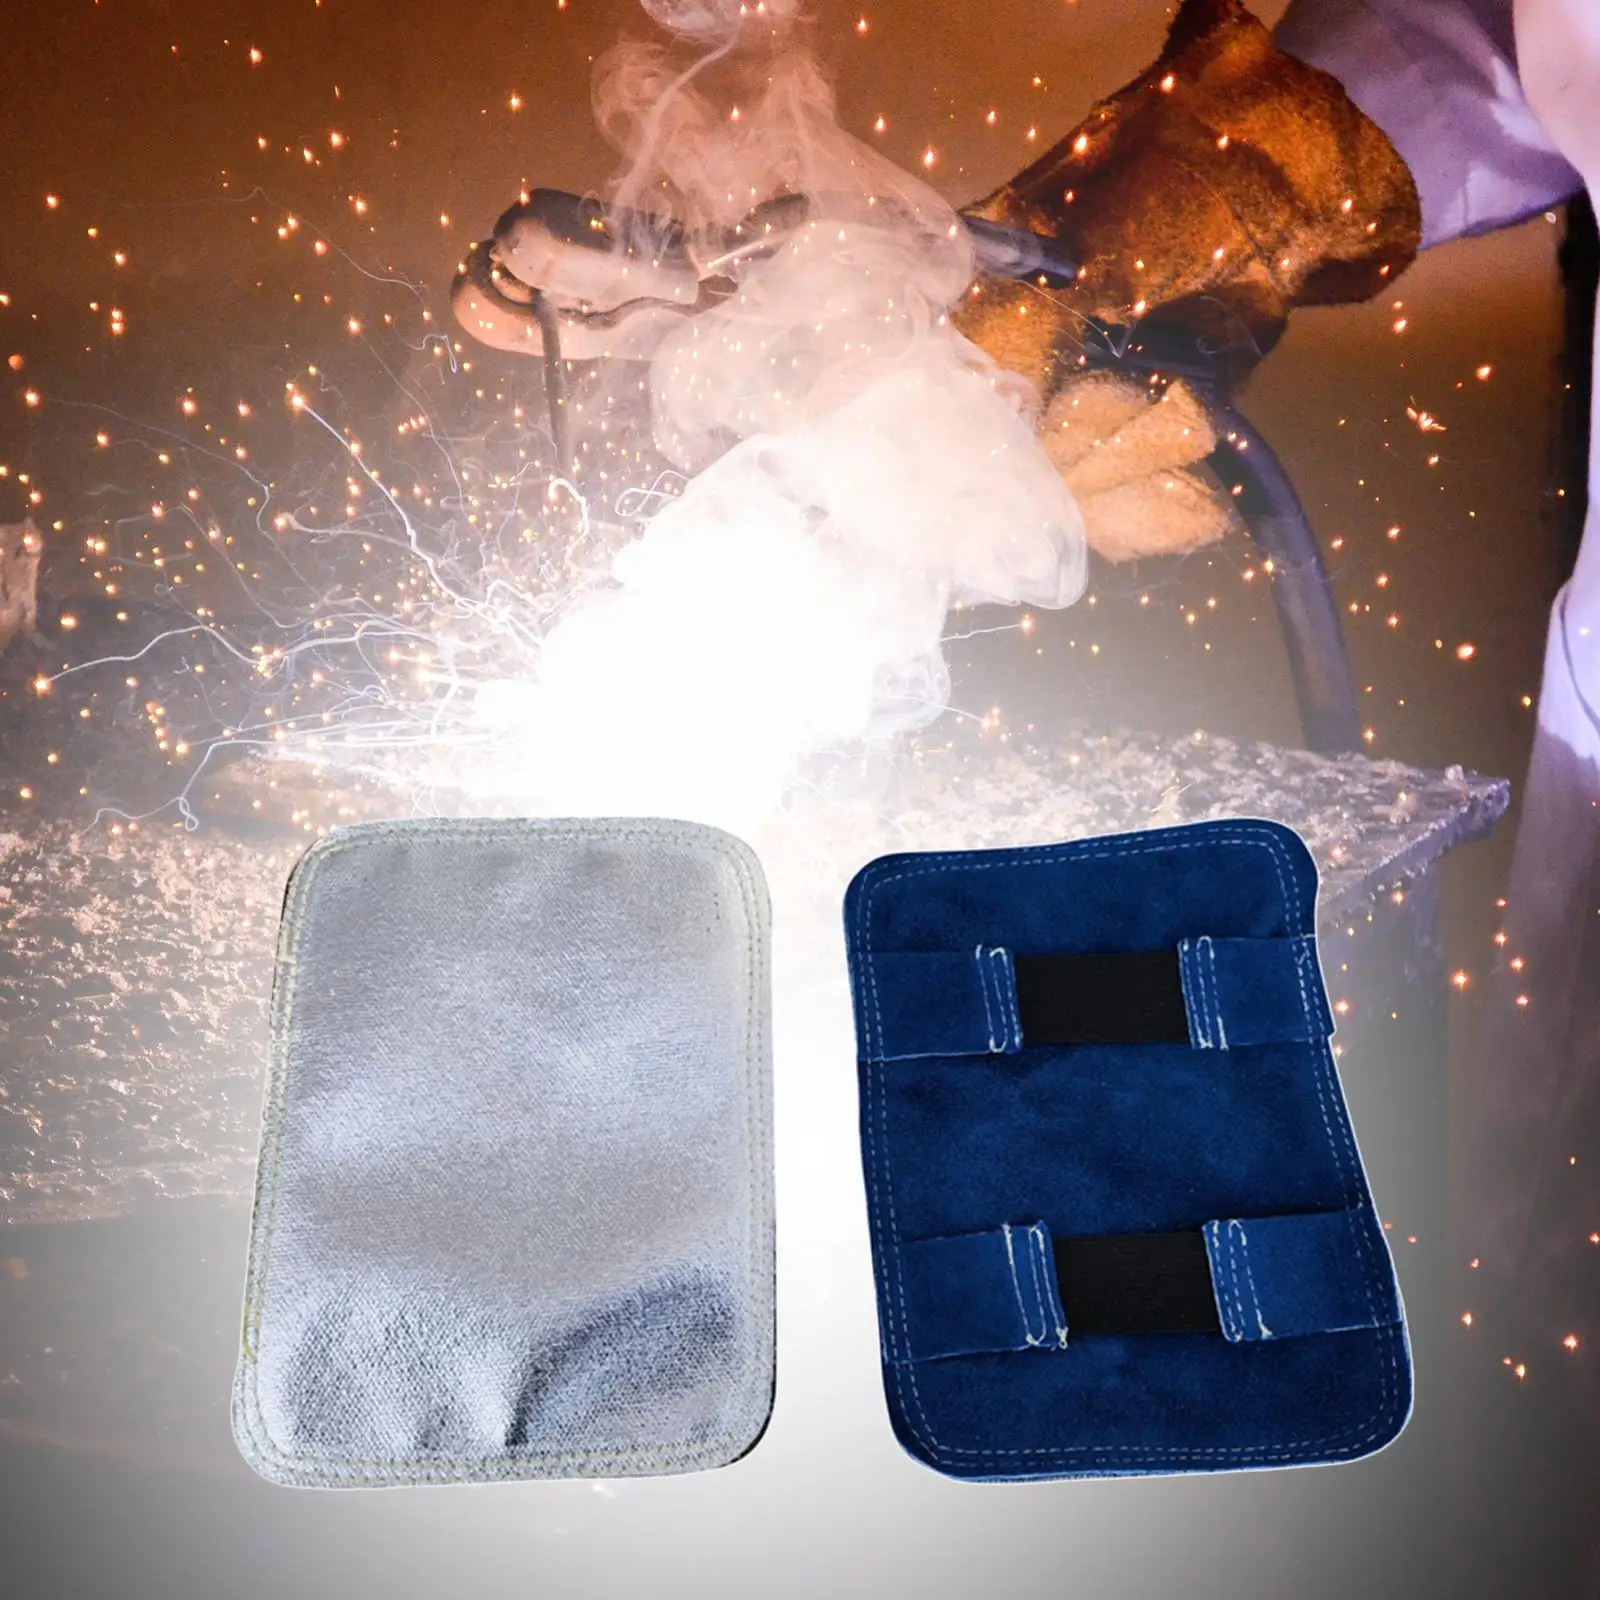 Aluminized Back Welding Hand Pad PU Leather Heat Heat Shield for Welder Furnace Cutting Metal Smelting Industrial Boiler Camping